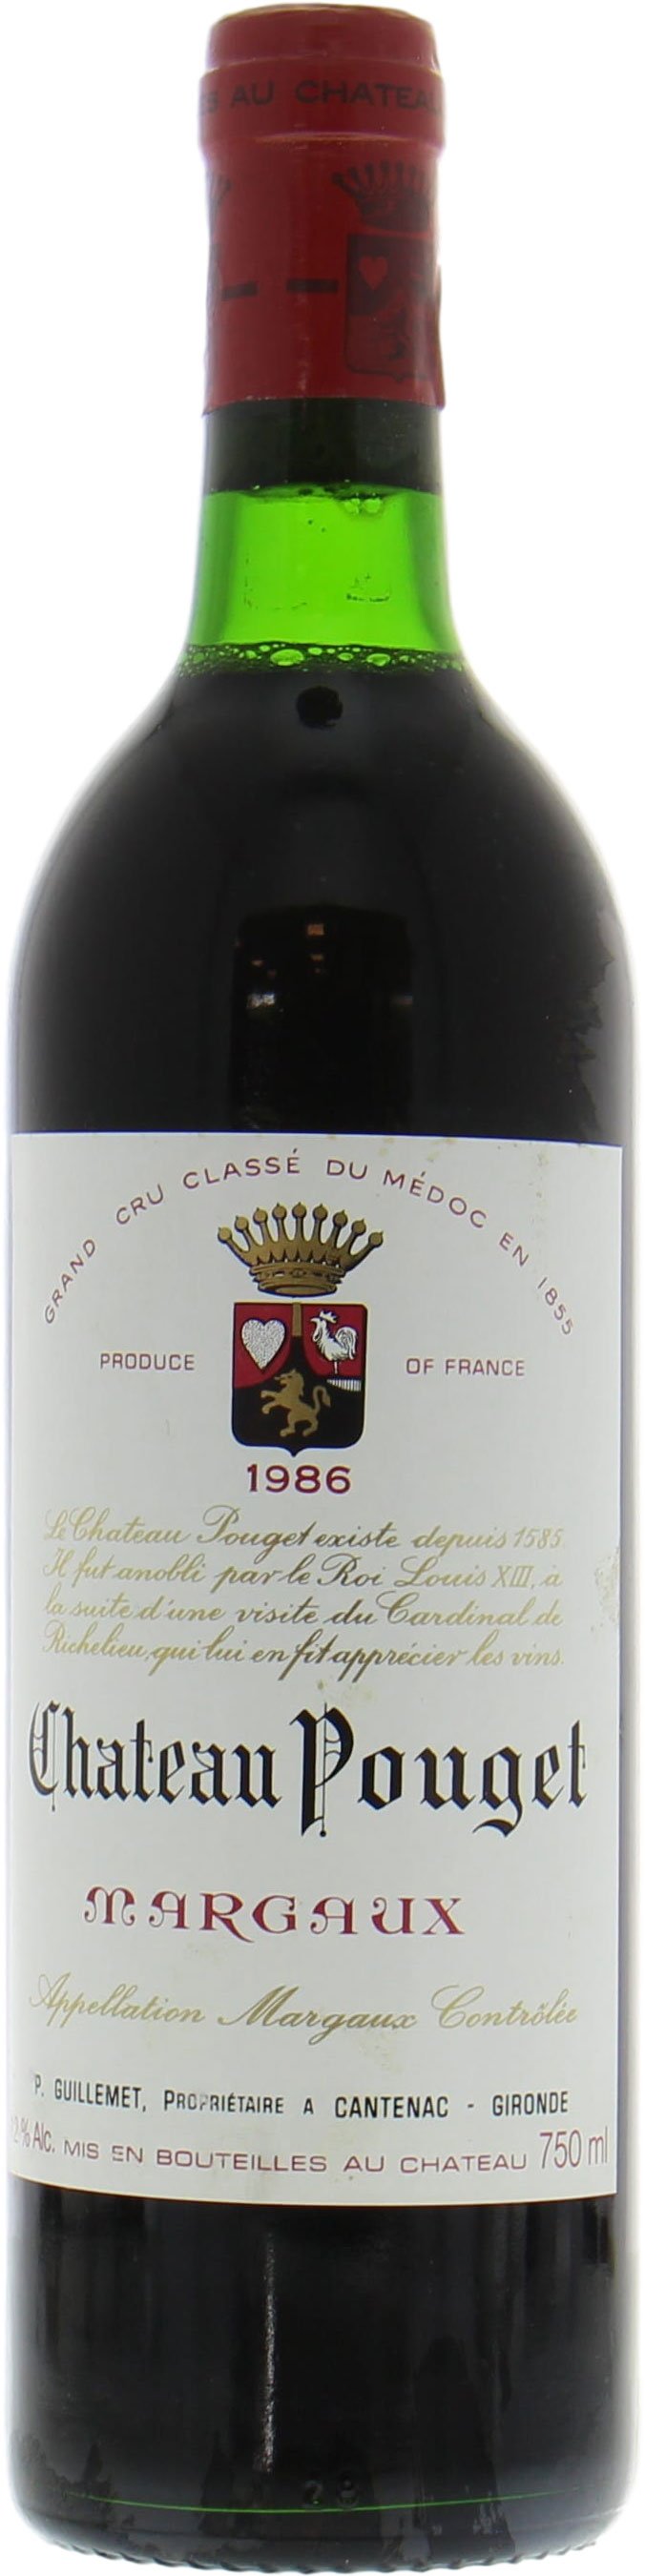 Chateau Pouget - Chateau Pouget 1986 From Original Wooden Case